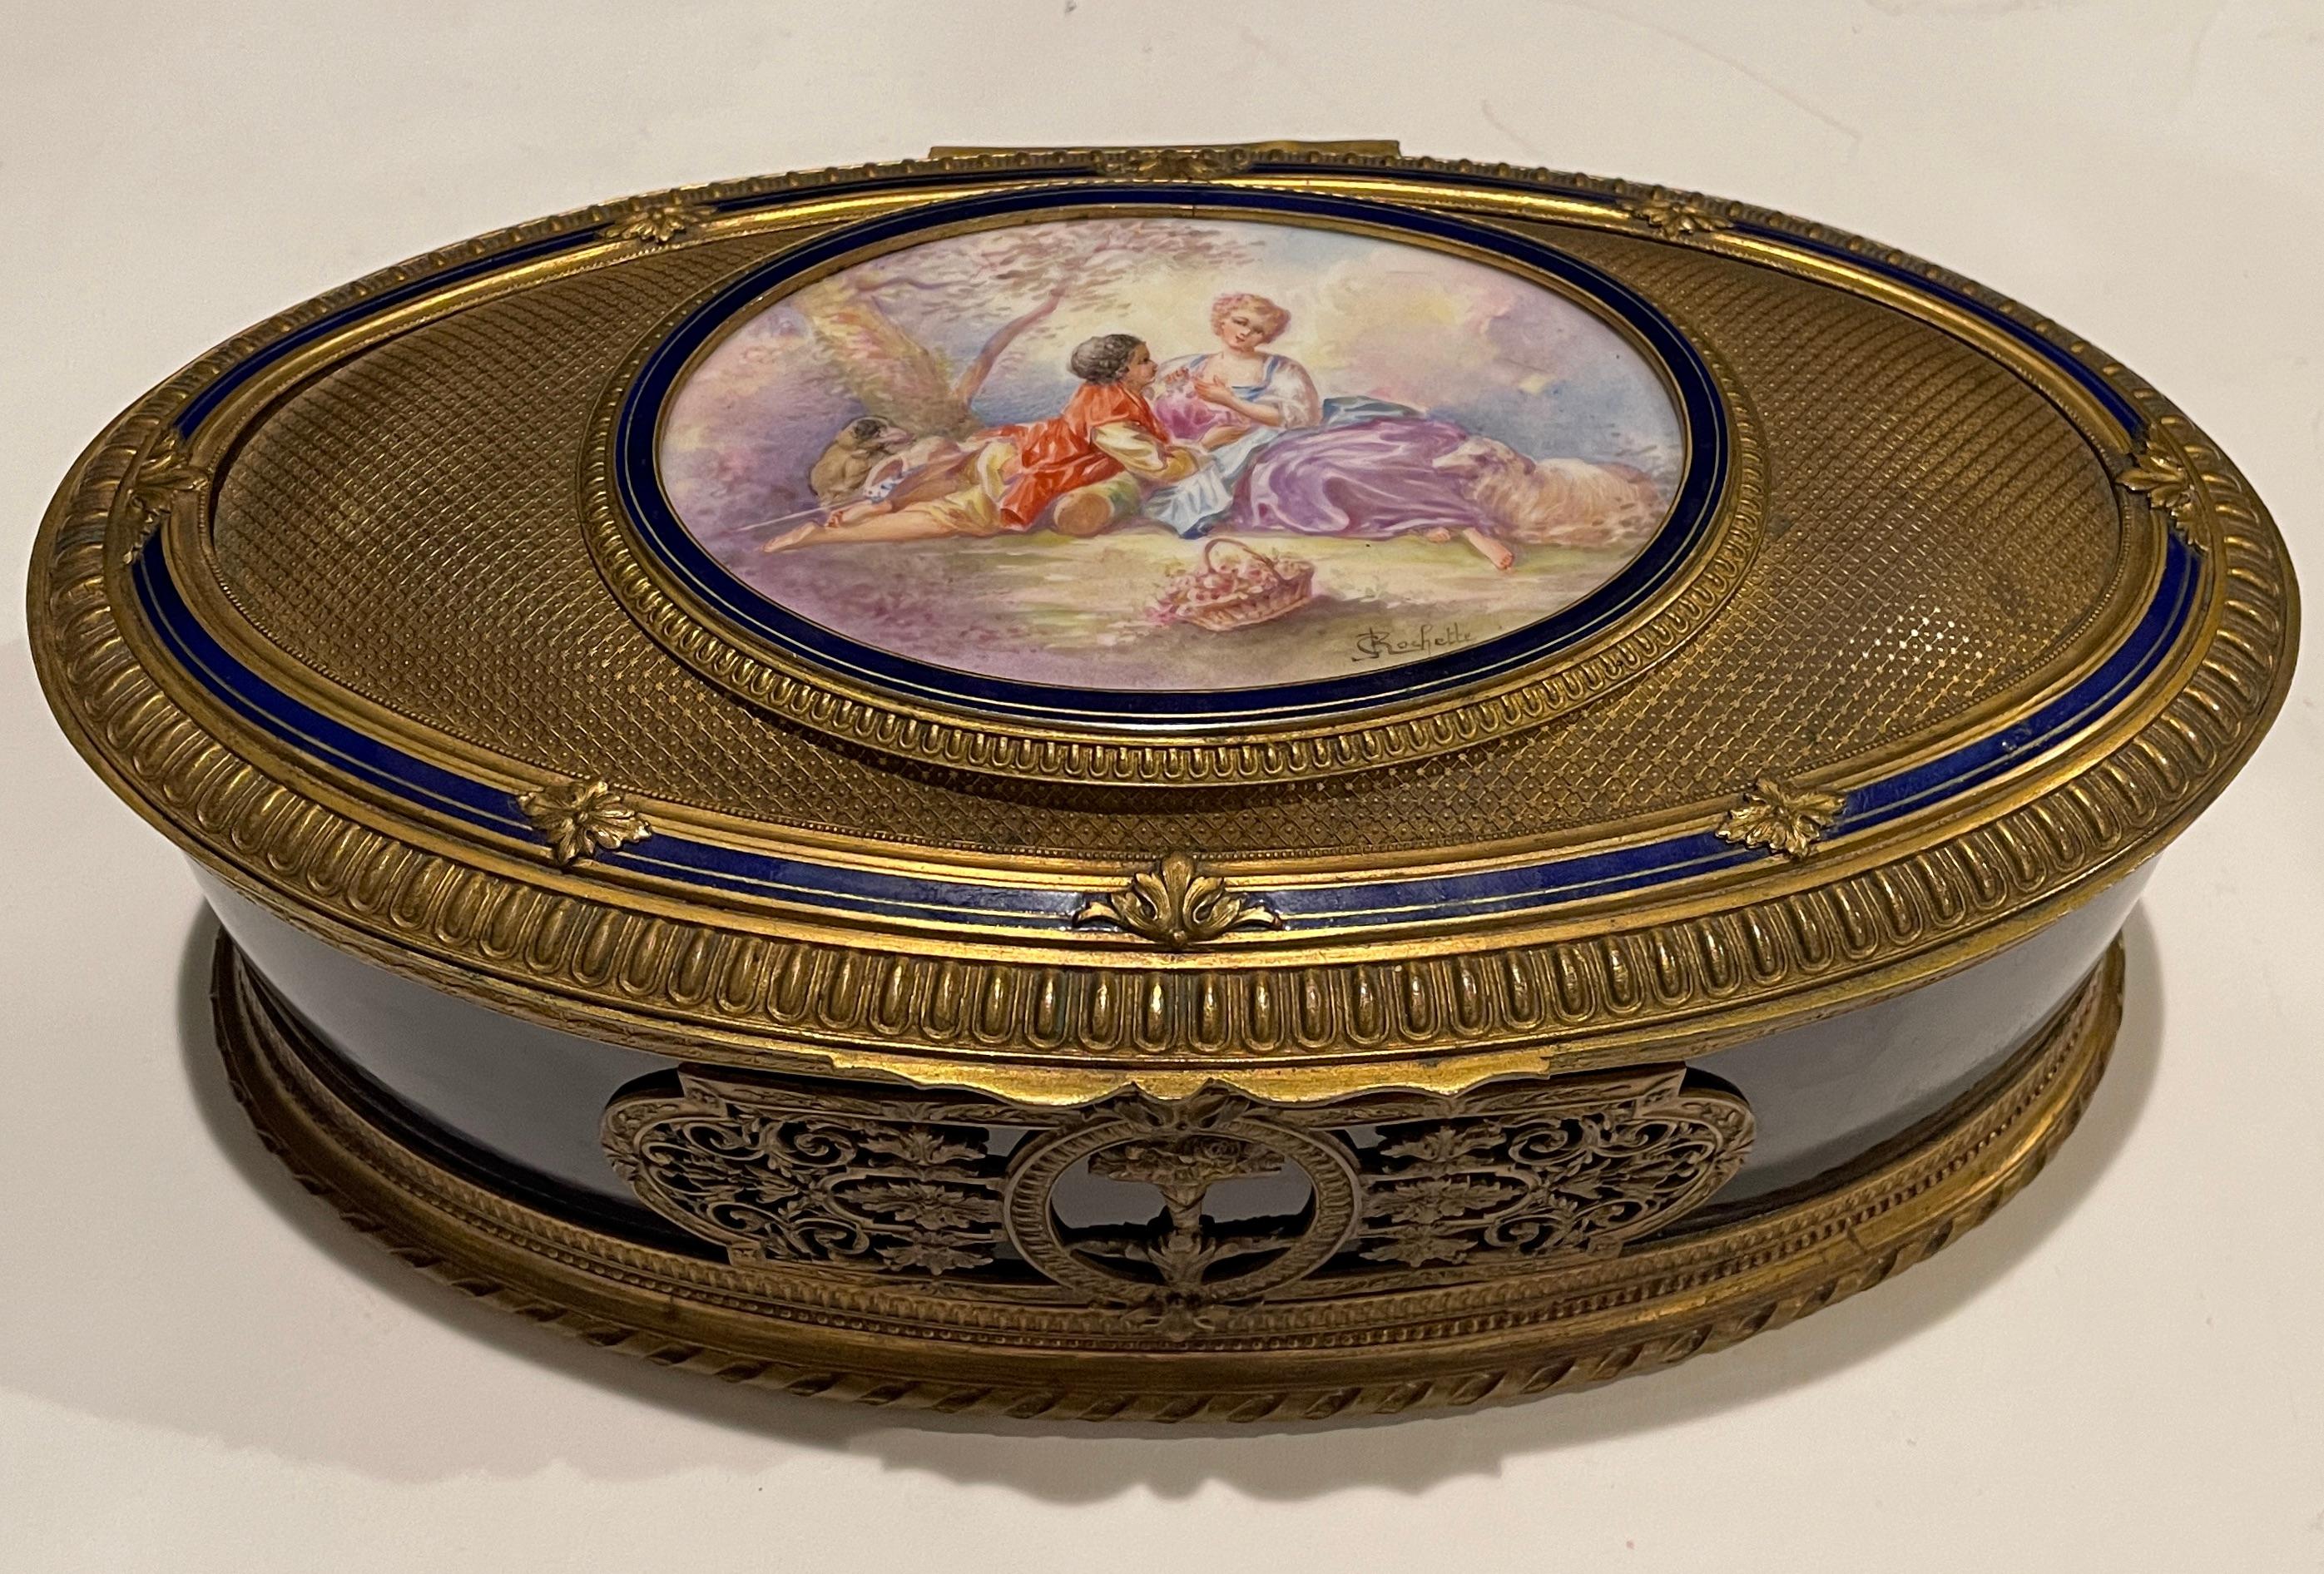 French 19th century French hand painted and gilt bronze mounted cobalt blue box. Artist-signed by J.C. Rochette – a well known artist who worked at the Sévres factory with her father A. Rochette in the later half of the 19th Century.